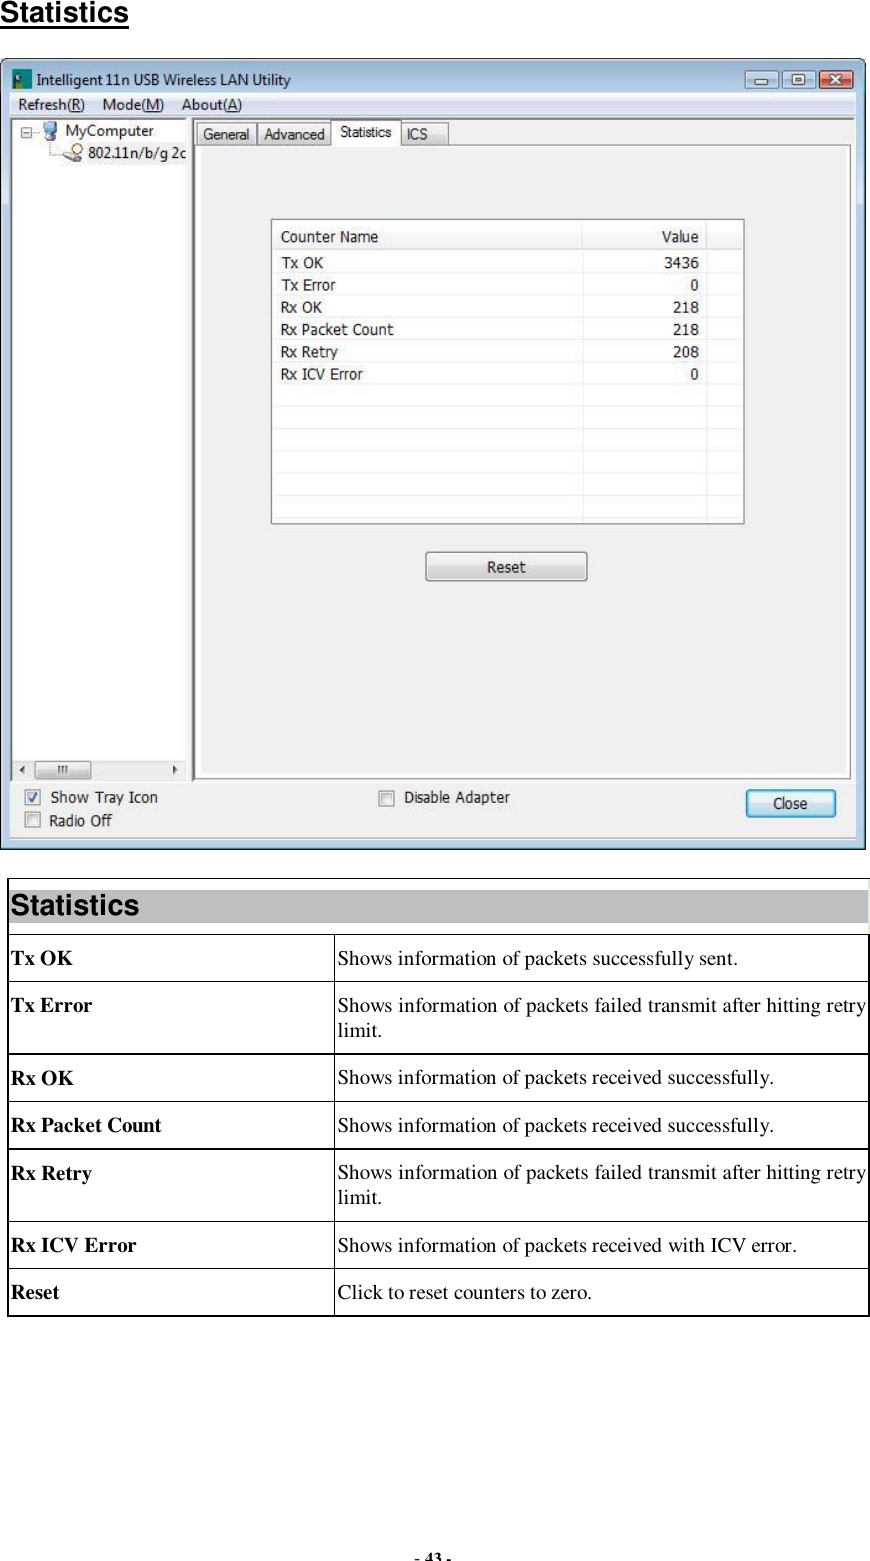  - 43 - Statistics  Statistics Tx OK  Shows information of packets successfully sent. Tx Error  Shows information of packets failed transmit after hitting retry limit. Rx OK  Shows information of packets received successfully. Rx Packet Count  Shows information of packets received successfully. Rx Retry  Shows information of packets failed transmit after hitting retry limit. Rx ICV Error  Shows information of packets received with ICV error. Reset  Click to reset counters to zero.  